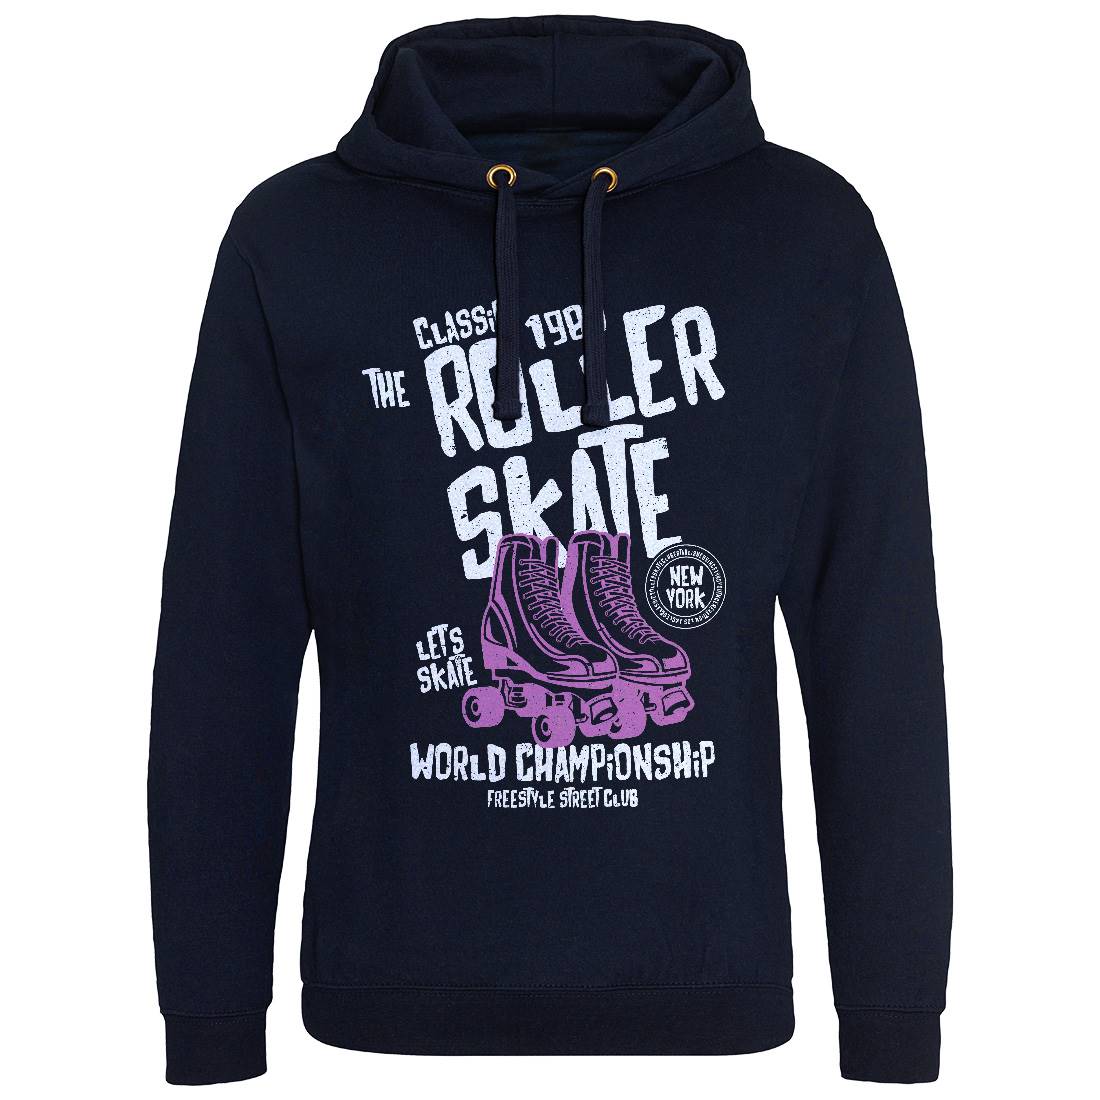 Roller Mens Hoodie Without Pocket Skate A129